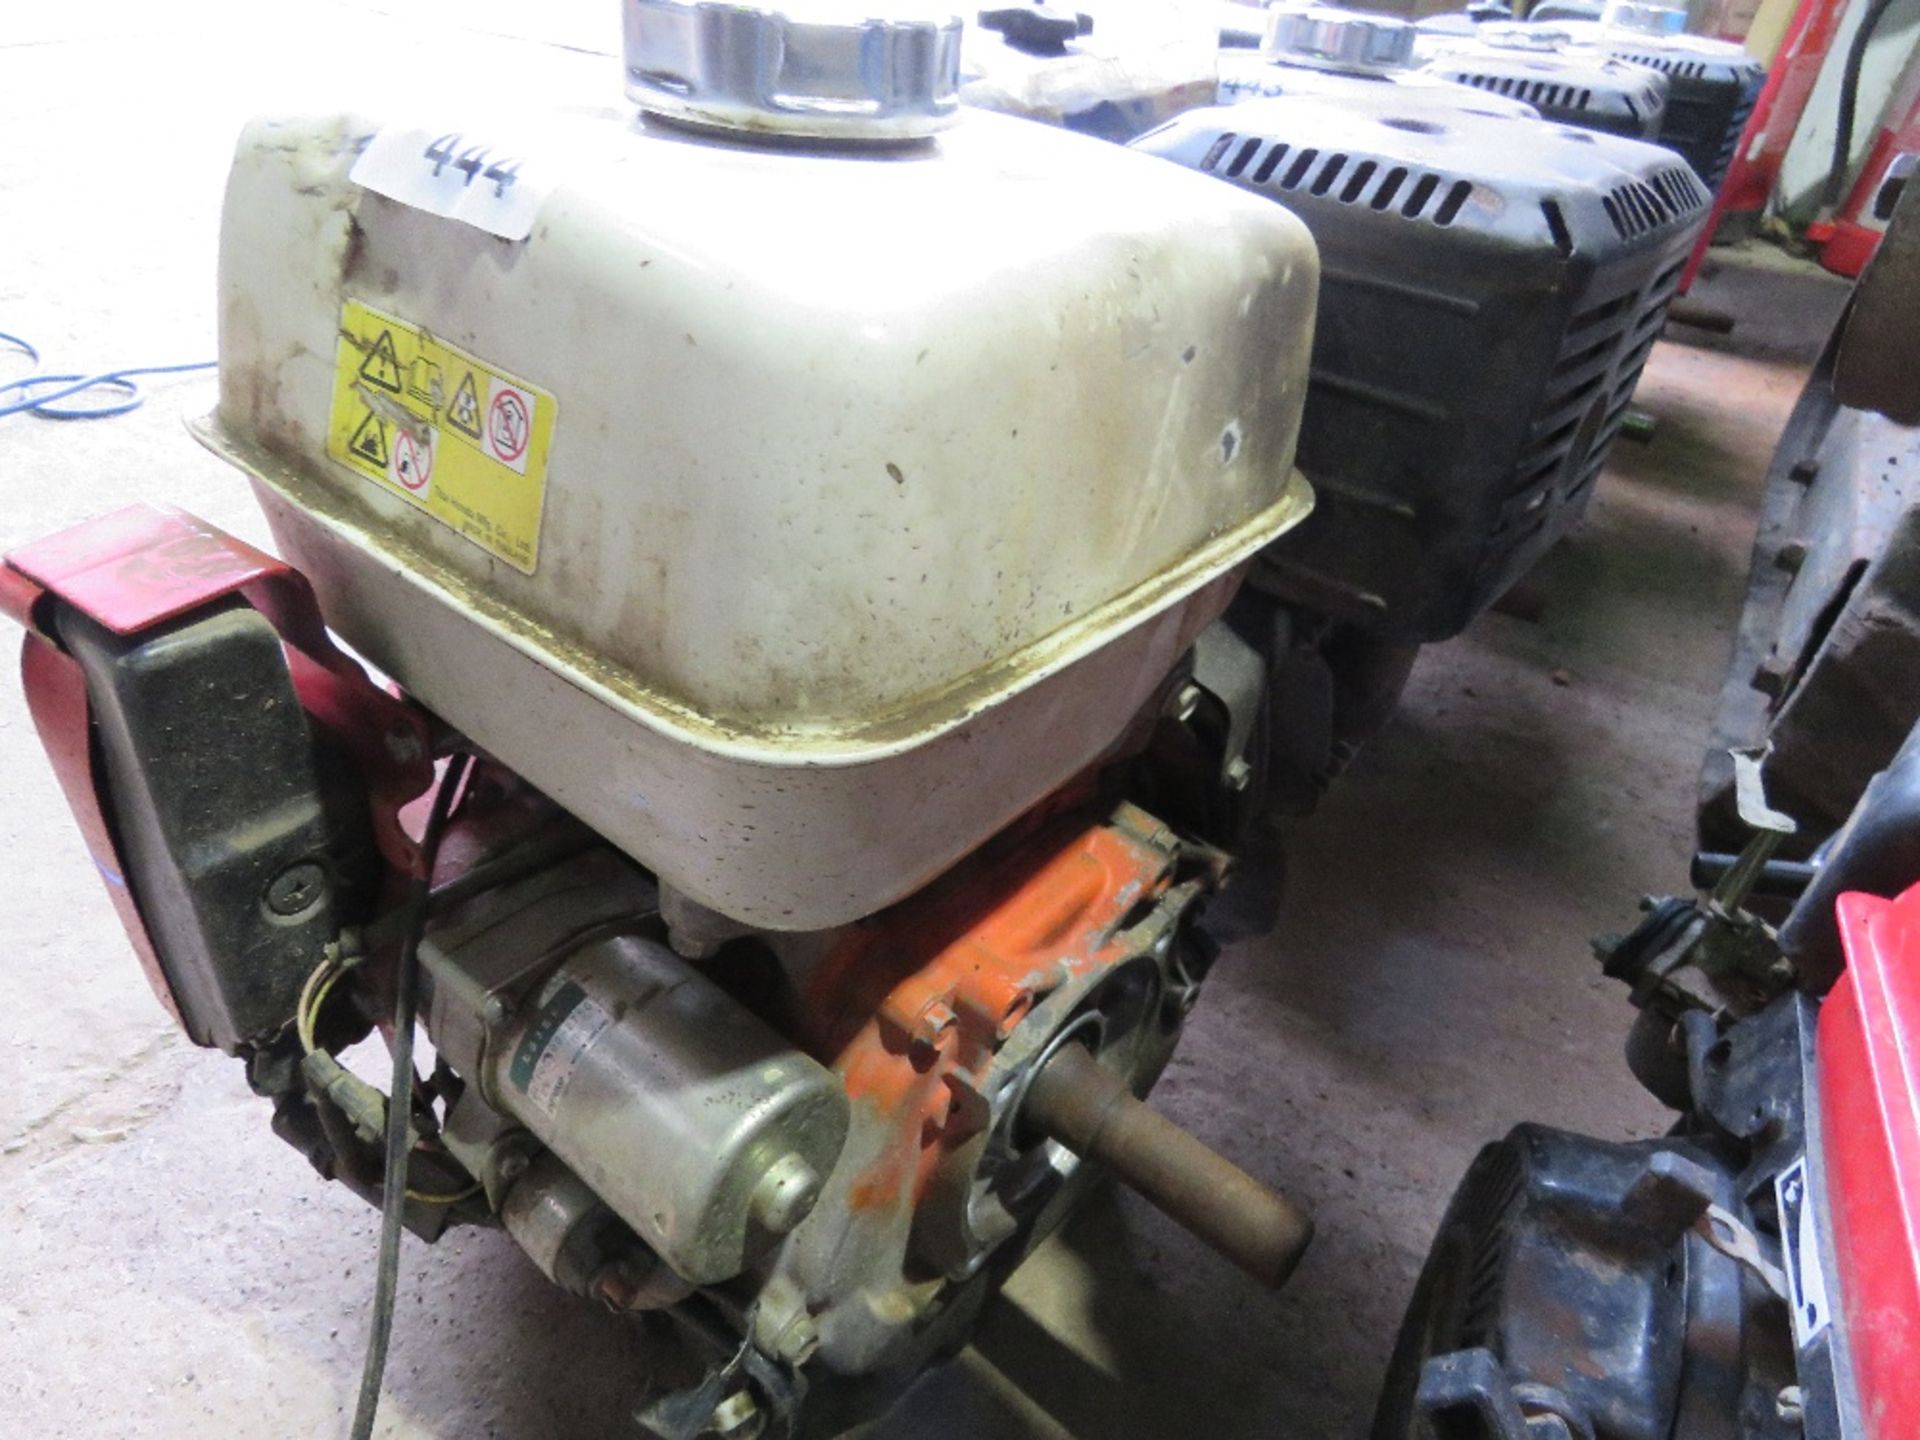 HONDA GX390 ELECTRIC START PETROL ENGINE, CONDITION UNKNOWN. - Image 2 of 3